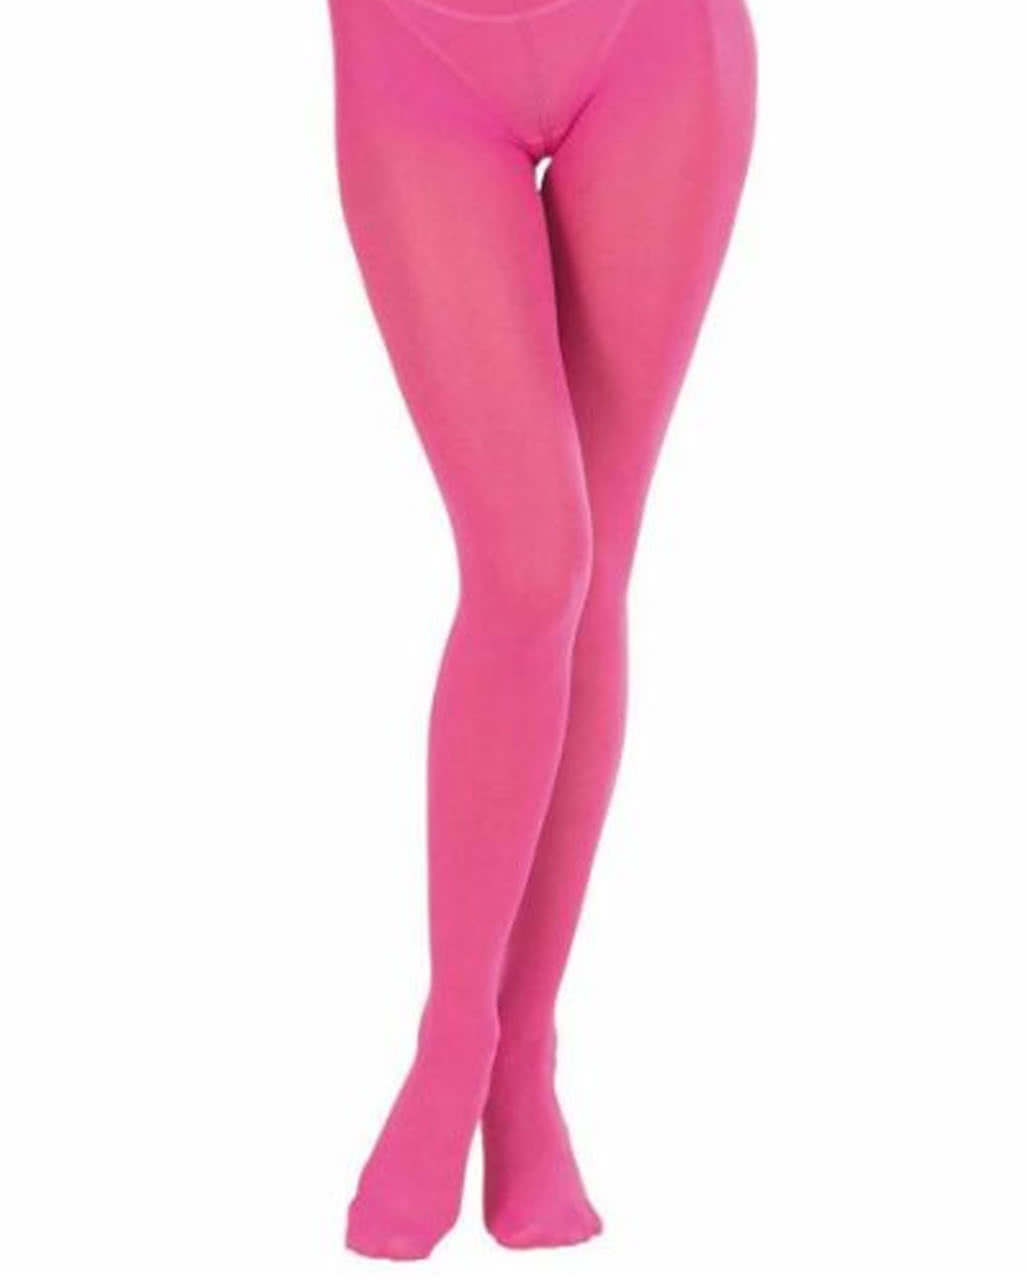 Tights pink | Buy costume accessories | horror-shop.com